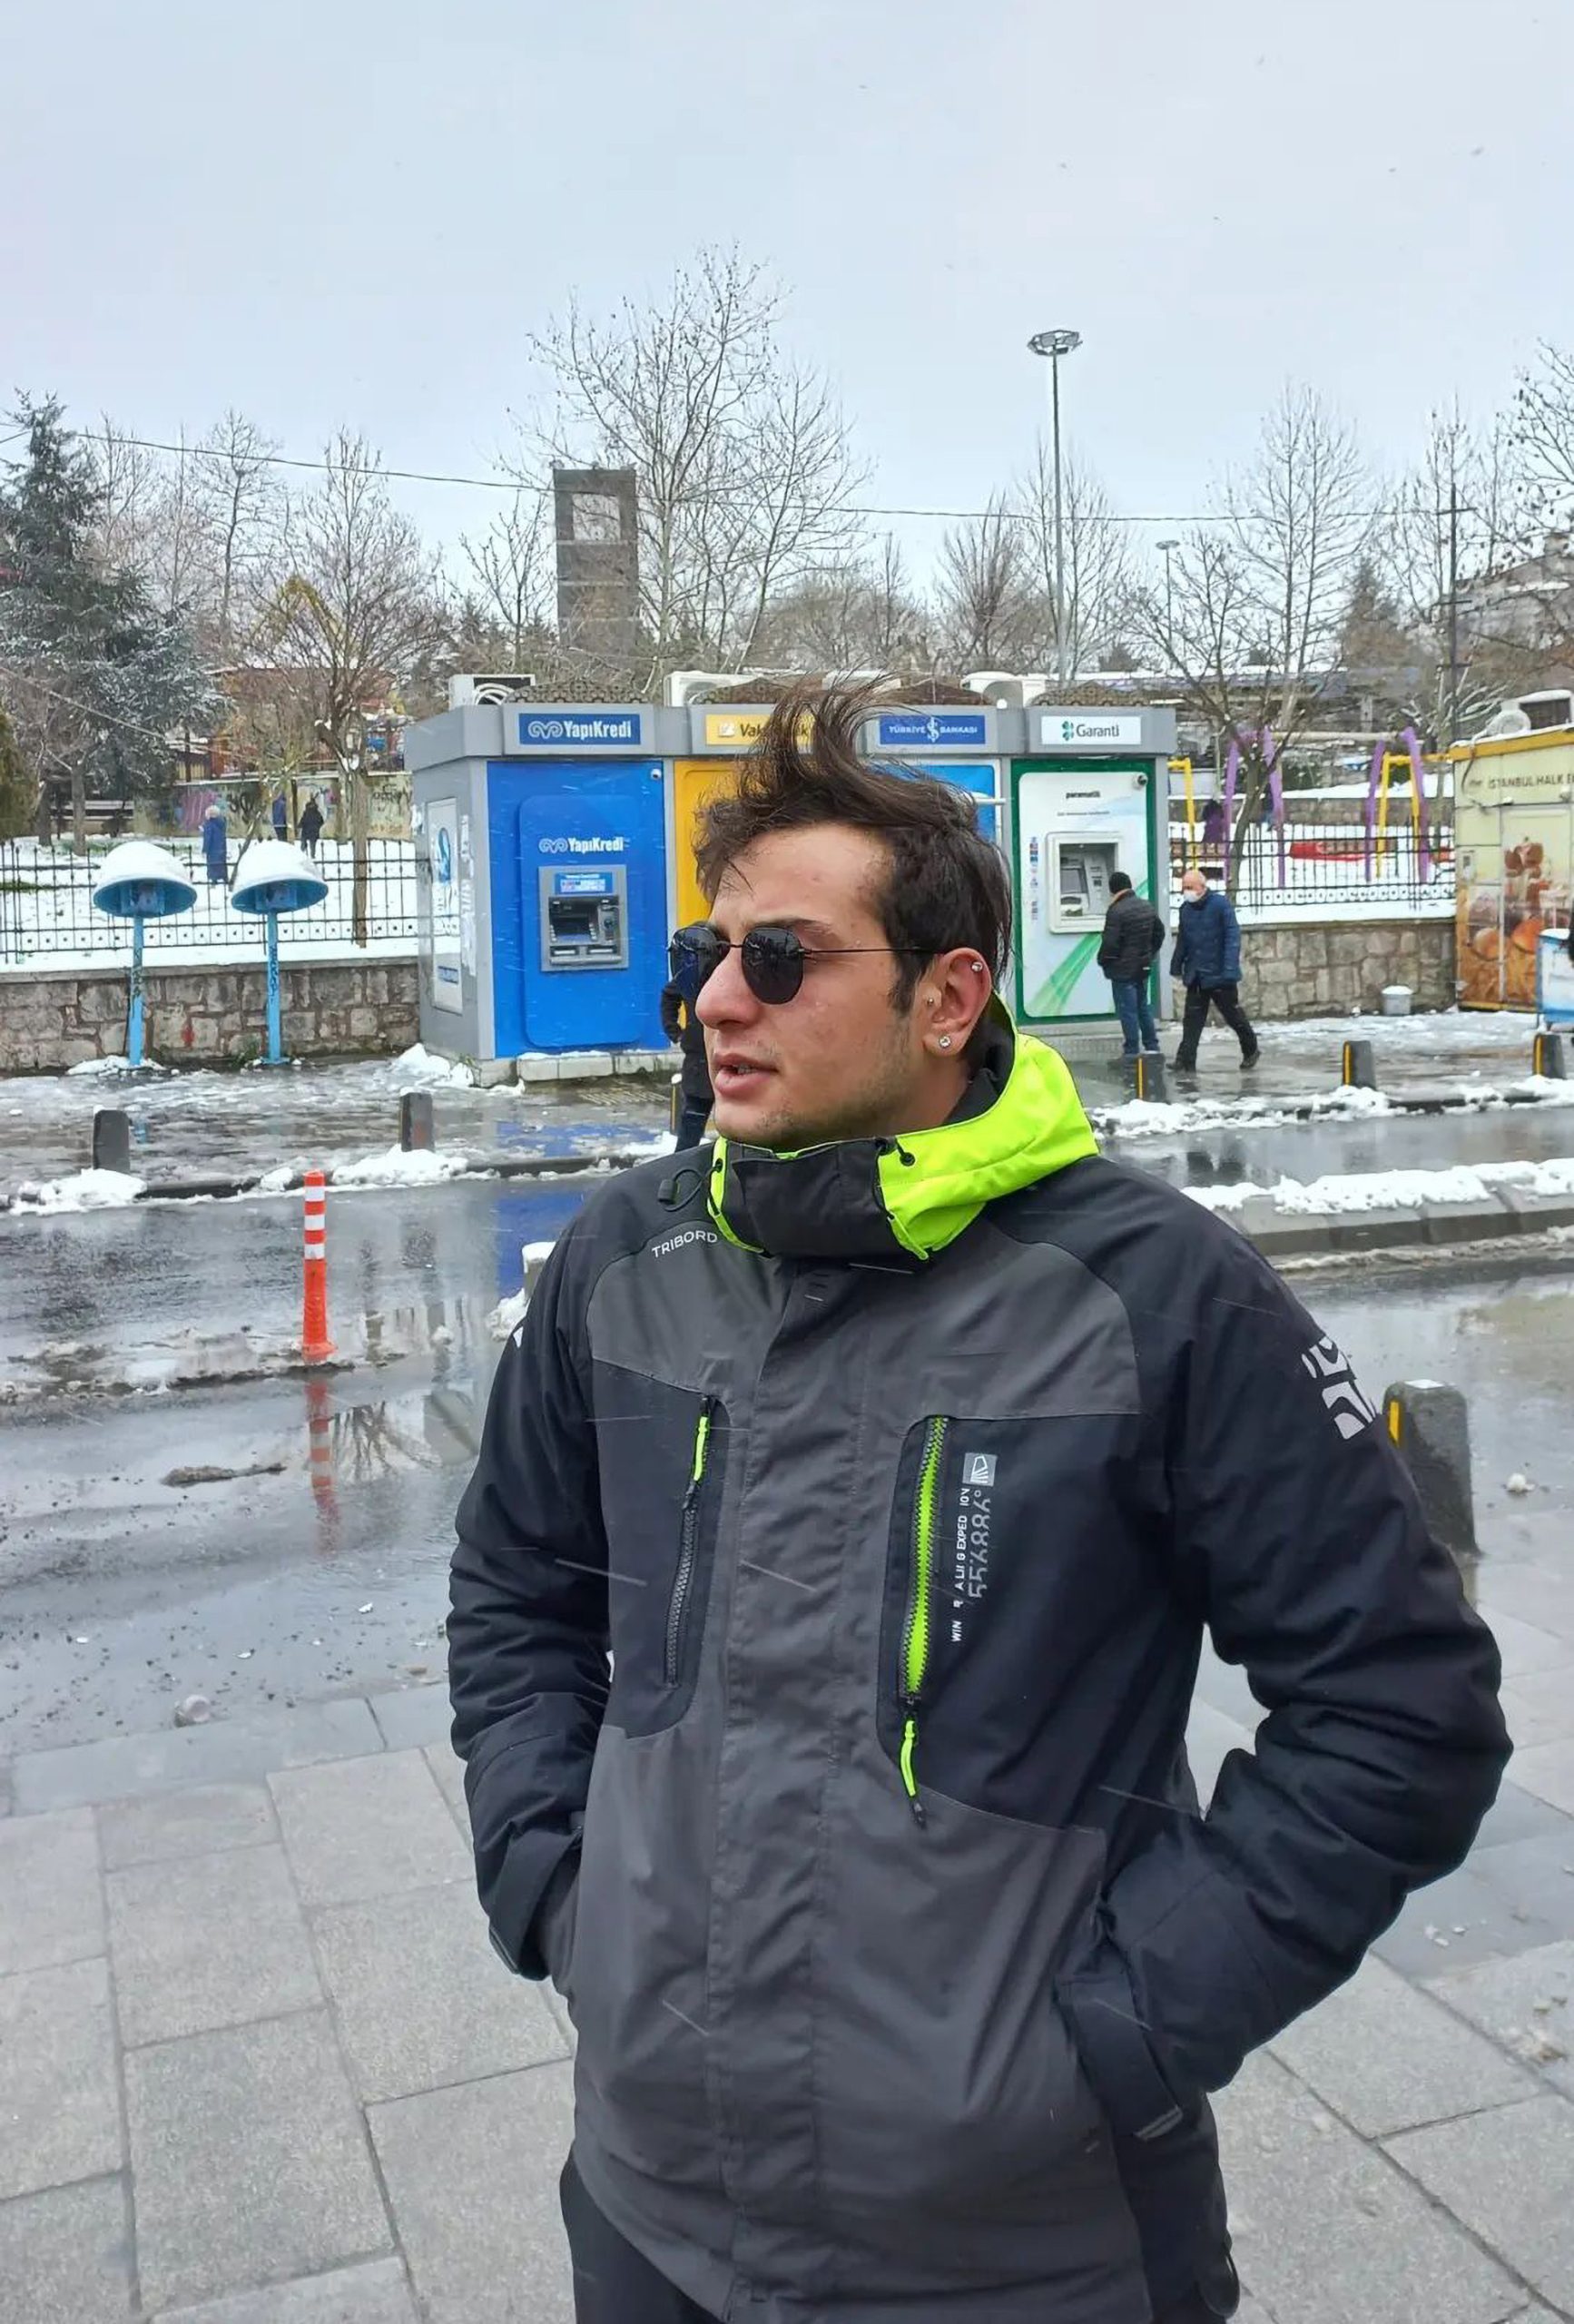 Read more about the article Turkish Man, 23, Risks Losing Feet After Walking Barefoot In Snow Amid Claims He Was Robbed By Migrant